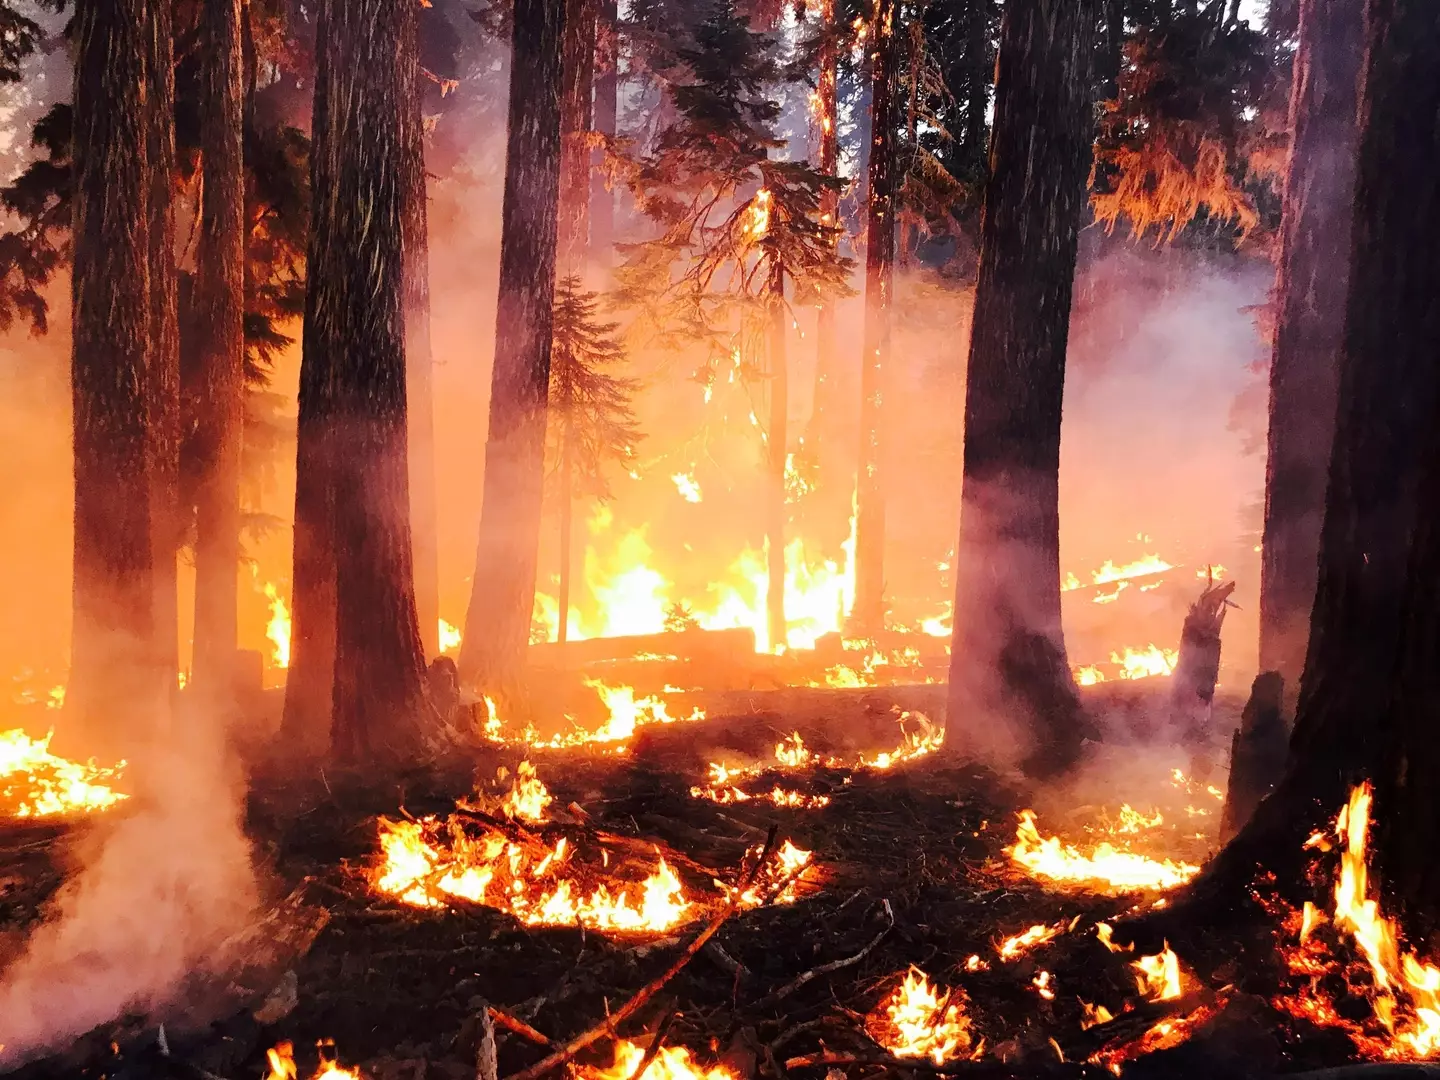 Extreme heat has caused forest fires around the world.